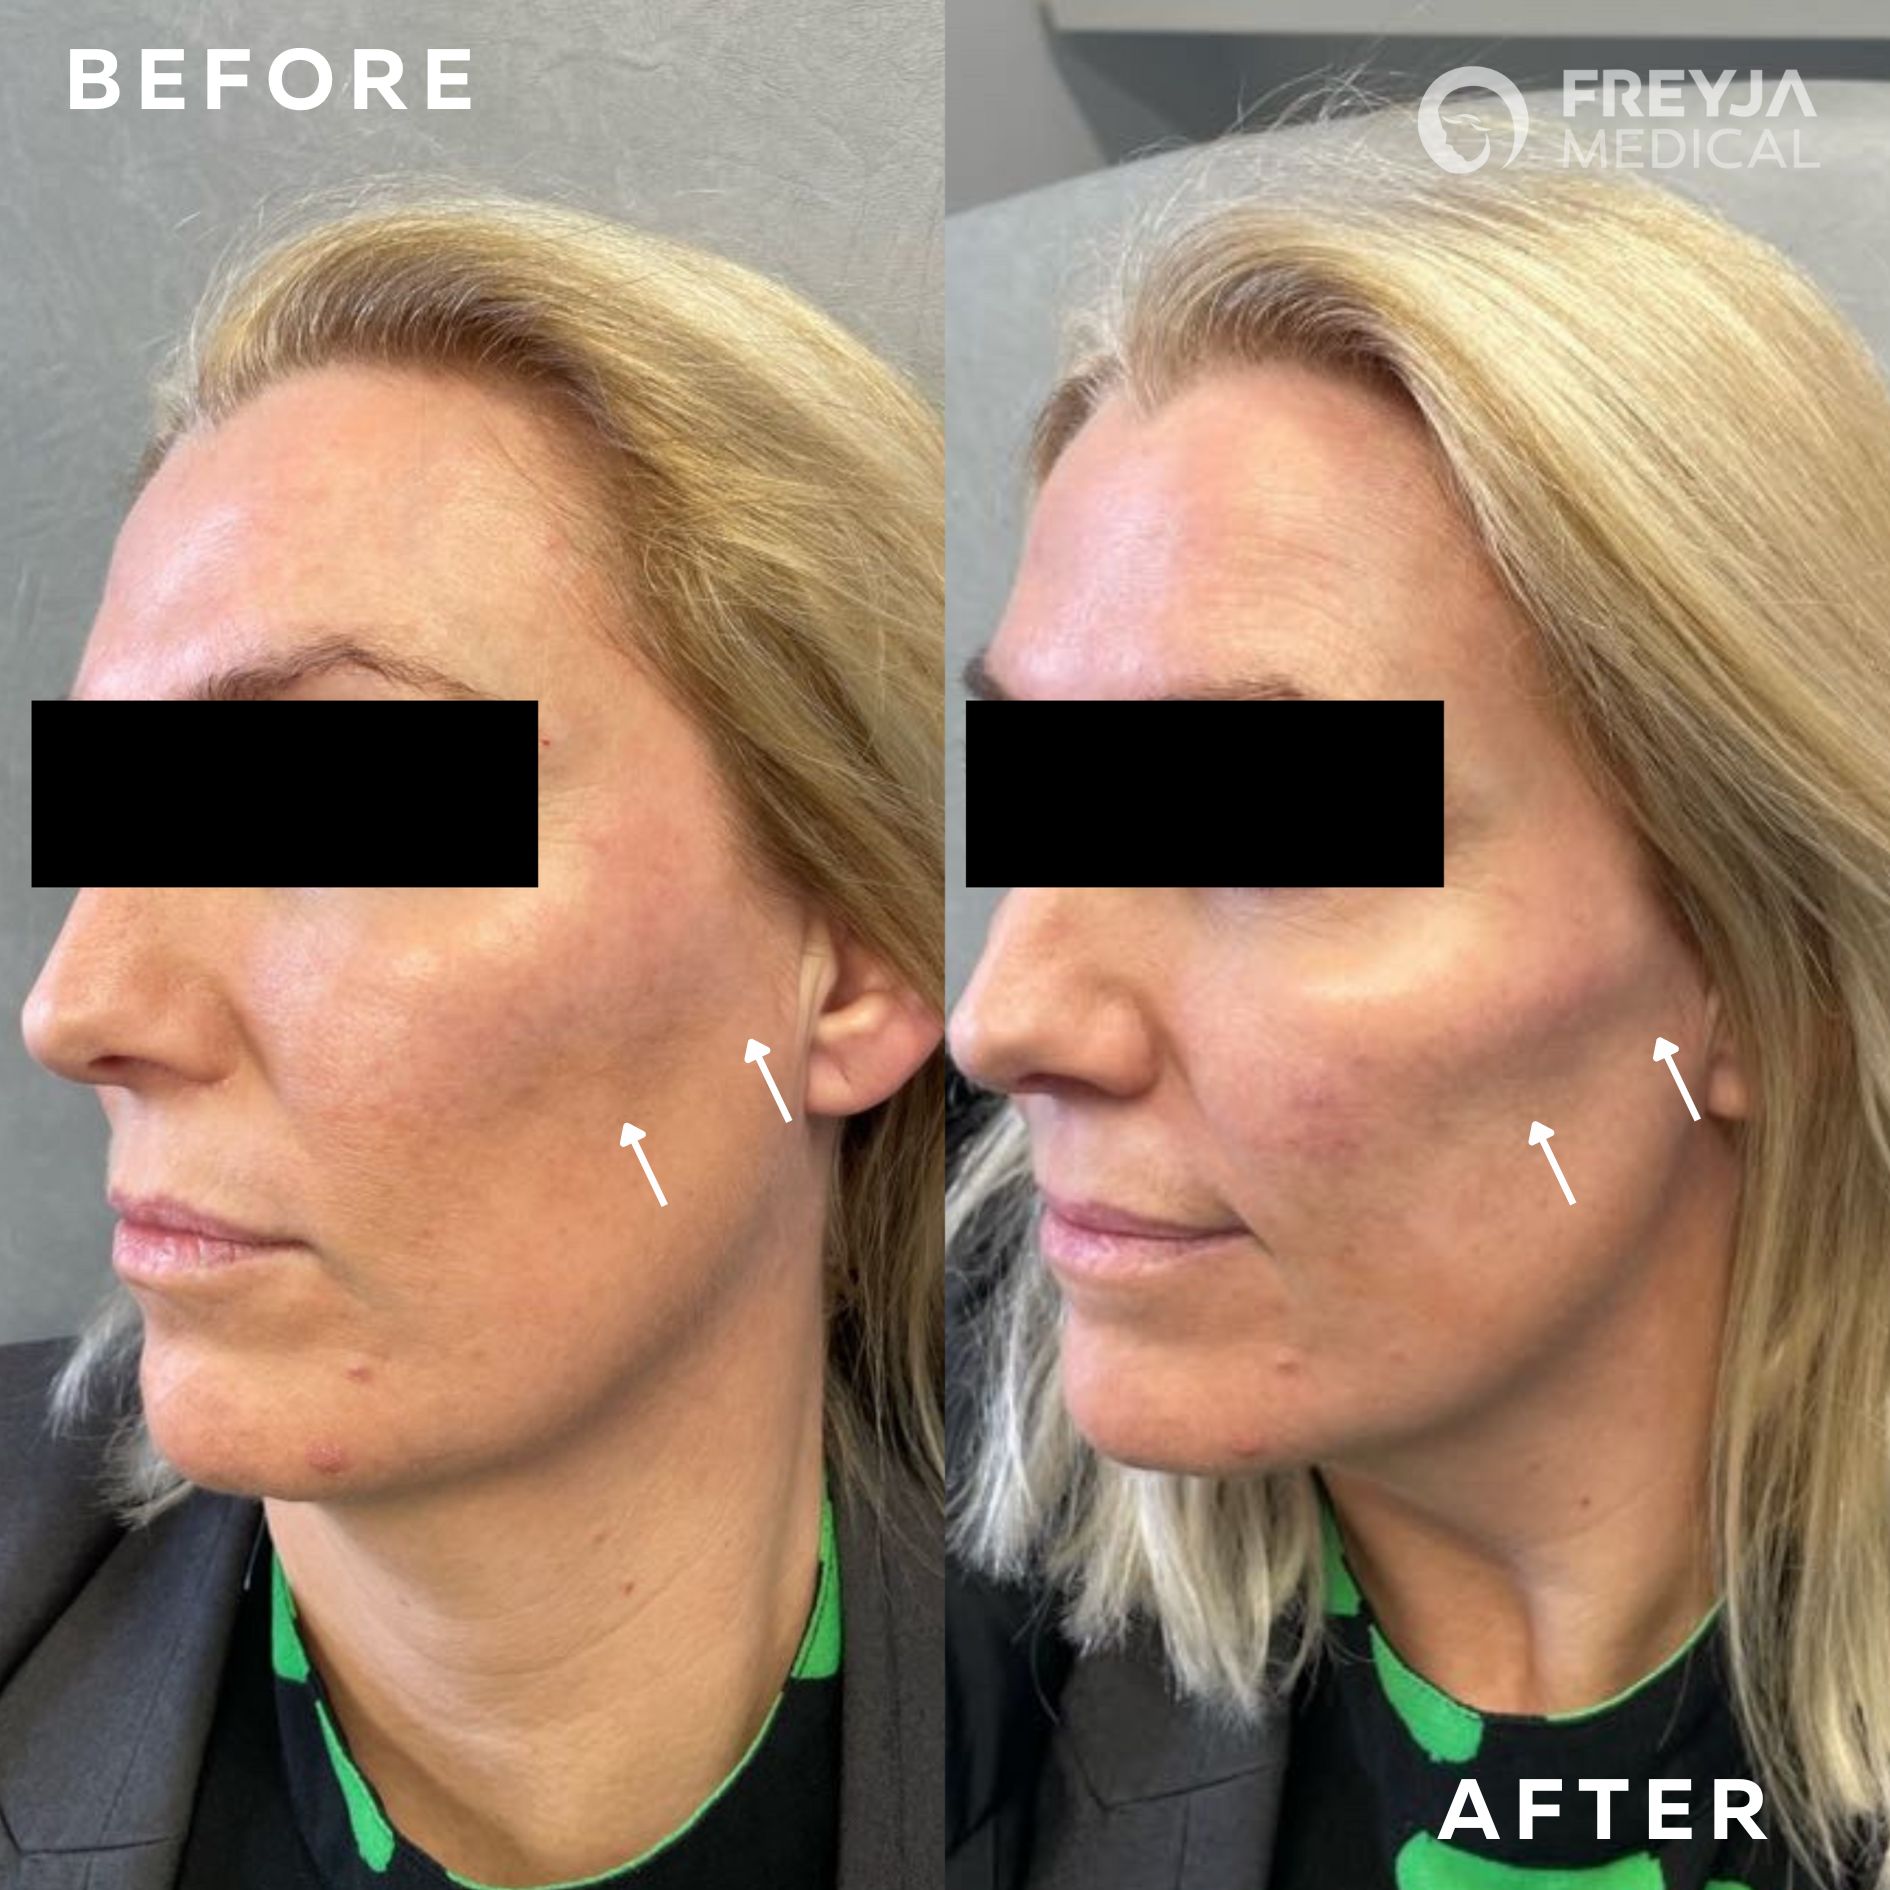 Dermal Fillers at Freyja Medical: Before and After Image